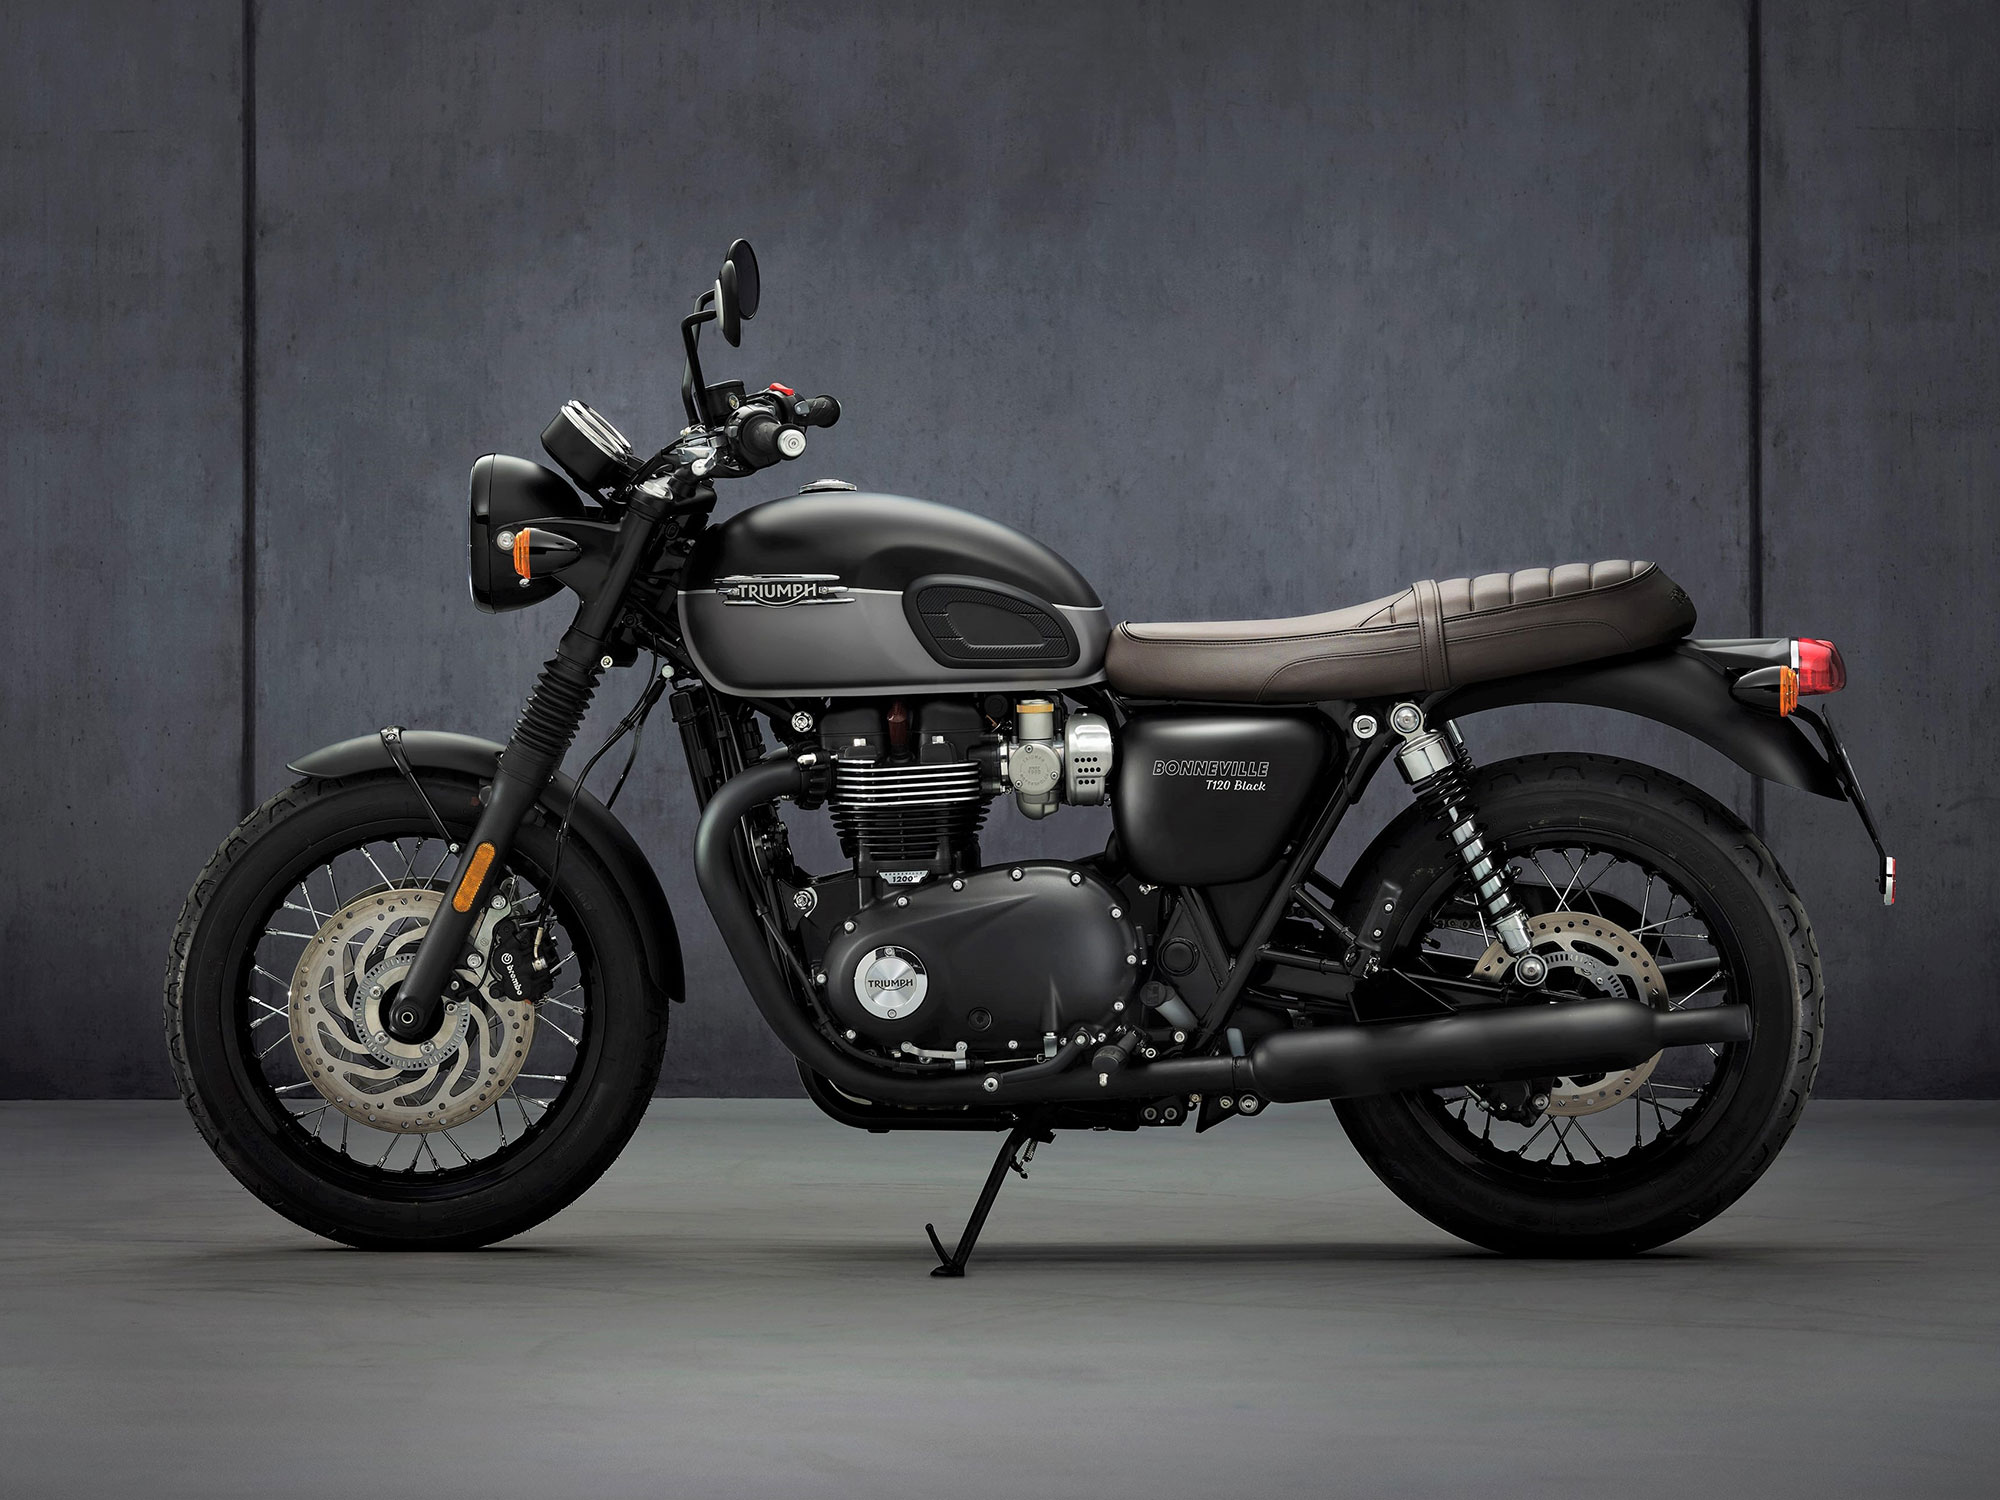 Triumph Bonneville: Classic style and how to get your way in Israel